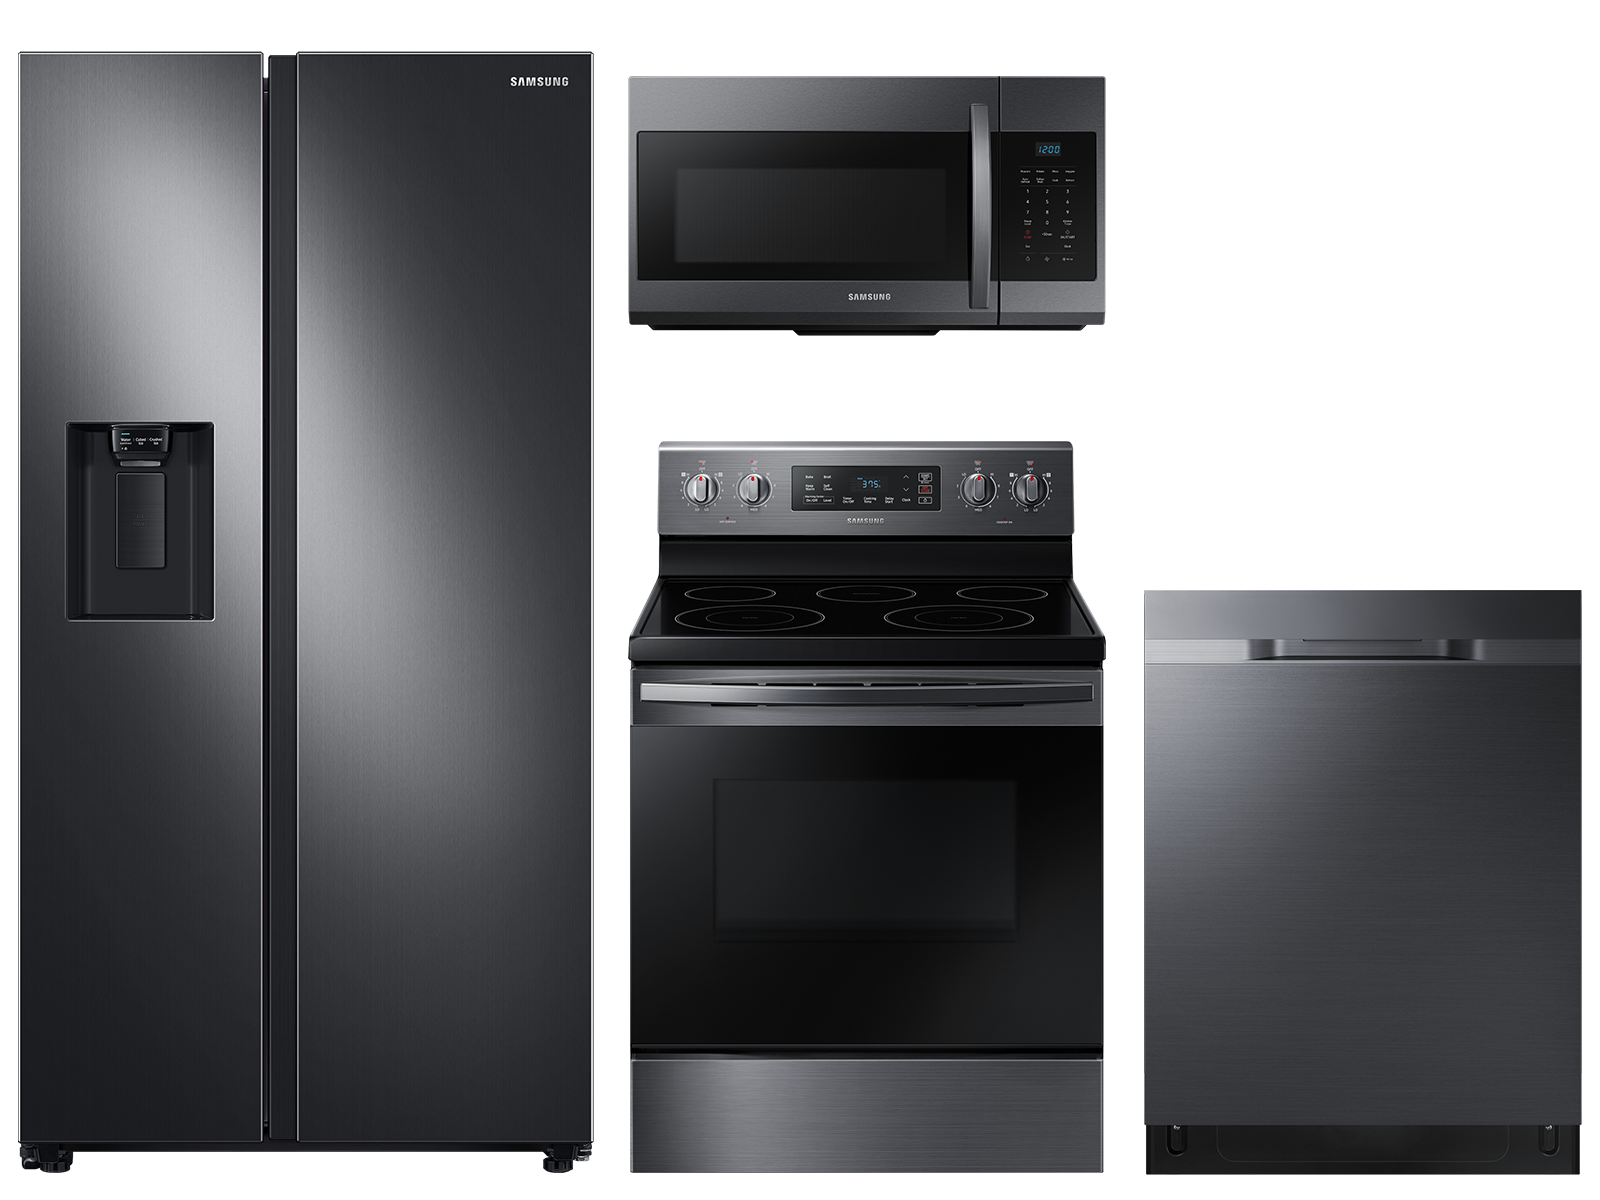 Photos - Fridge Samsung Large capacity Side-by-Side refrigerator & electric range package 